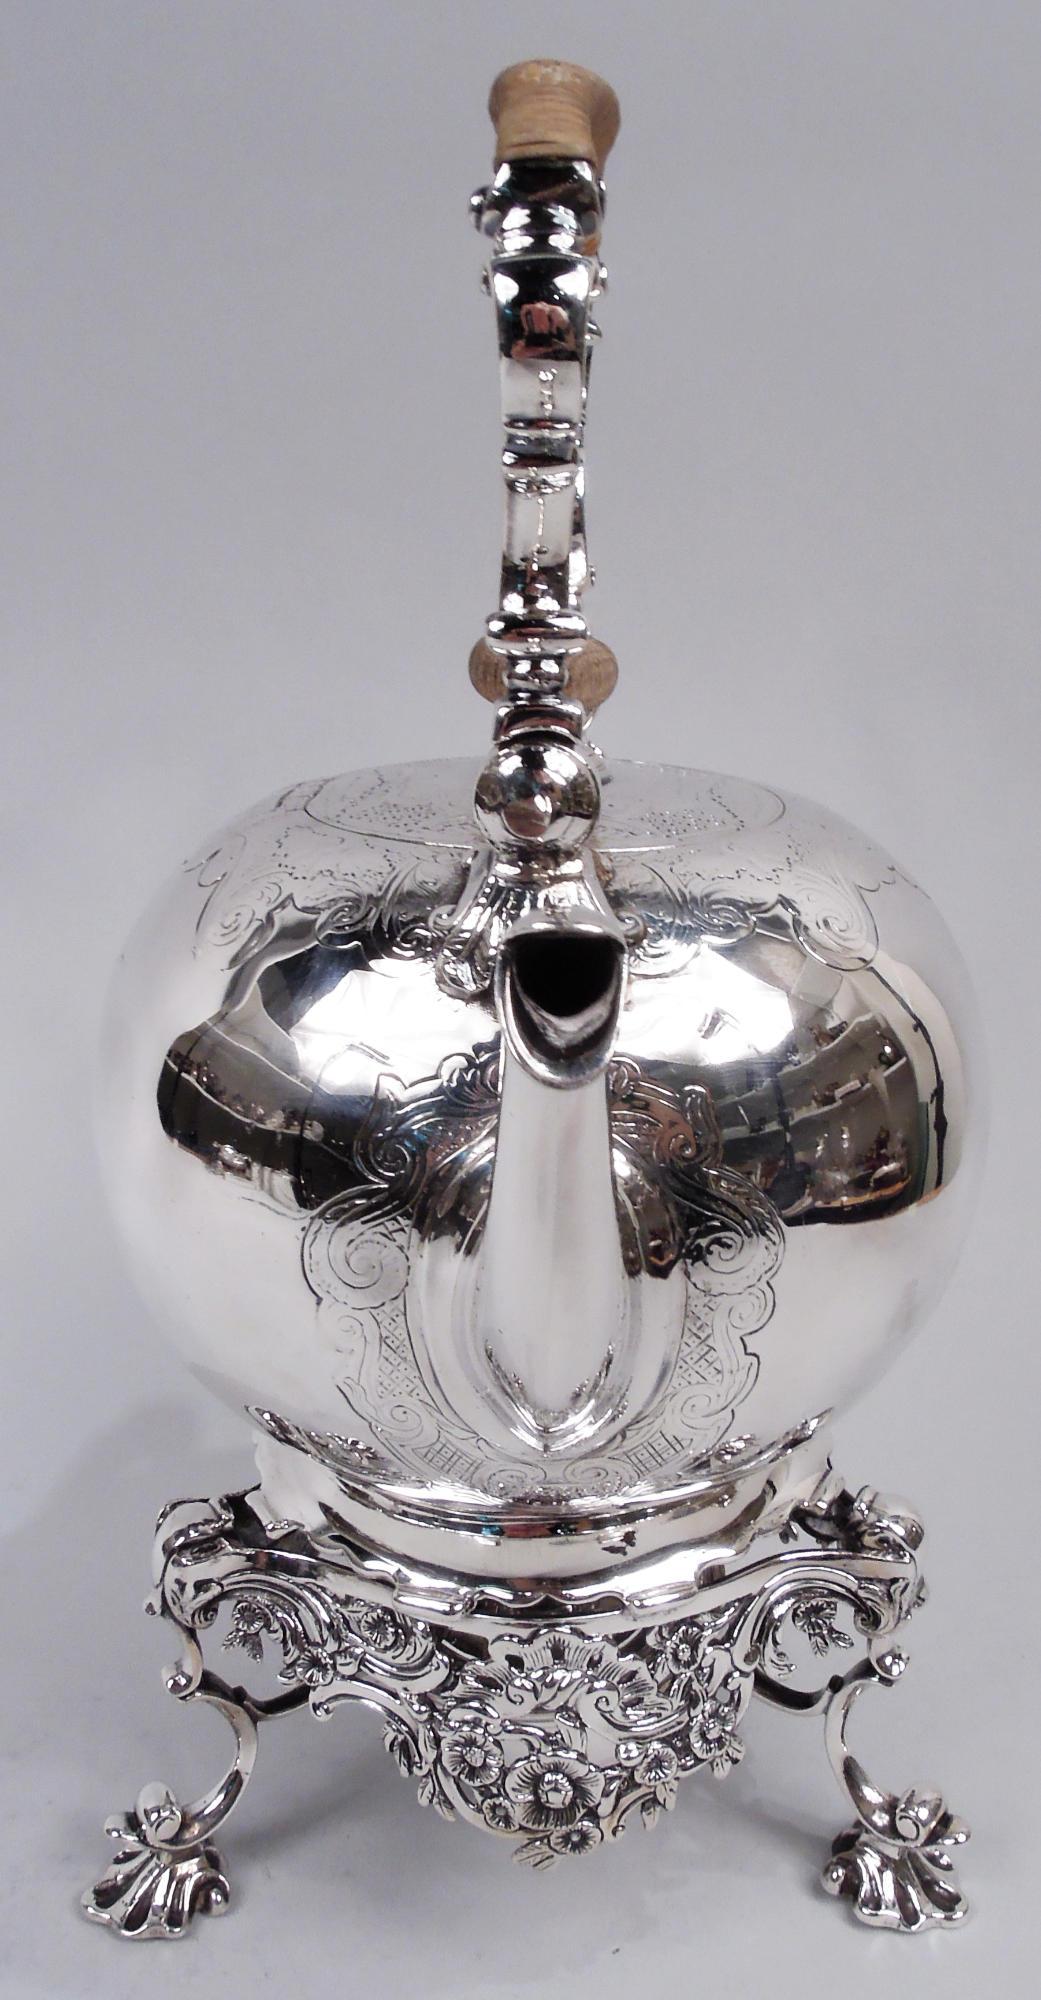 English Georgian sterling silver hot water kettle, 18th century. Globular with s-scroll spout and rattan-wrapped swing handle with scroll supports and mounts. Hinged and flush cover with stained-wood finial. Chased scrollwork, diaper, and scallop